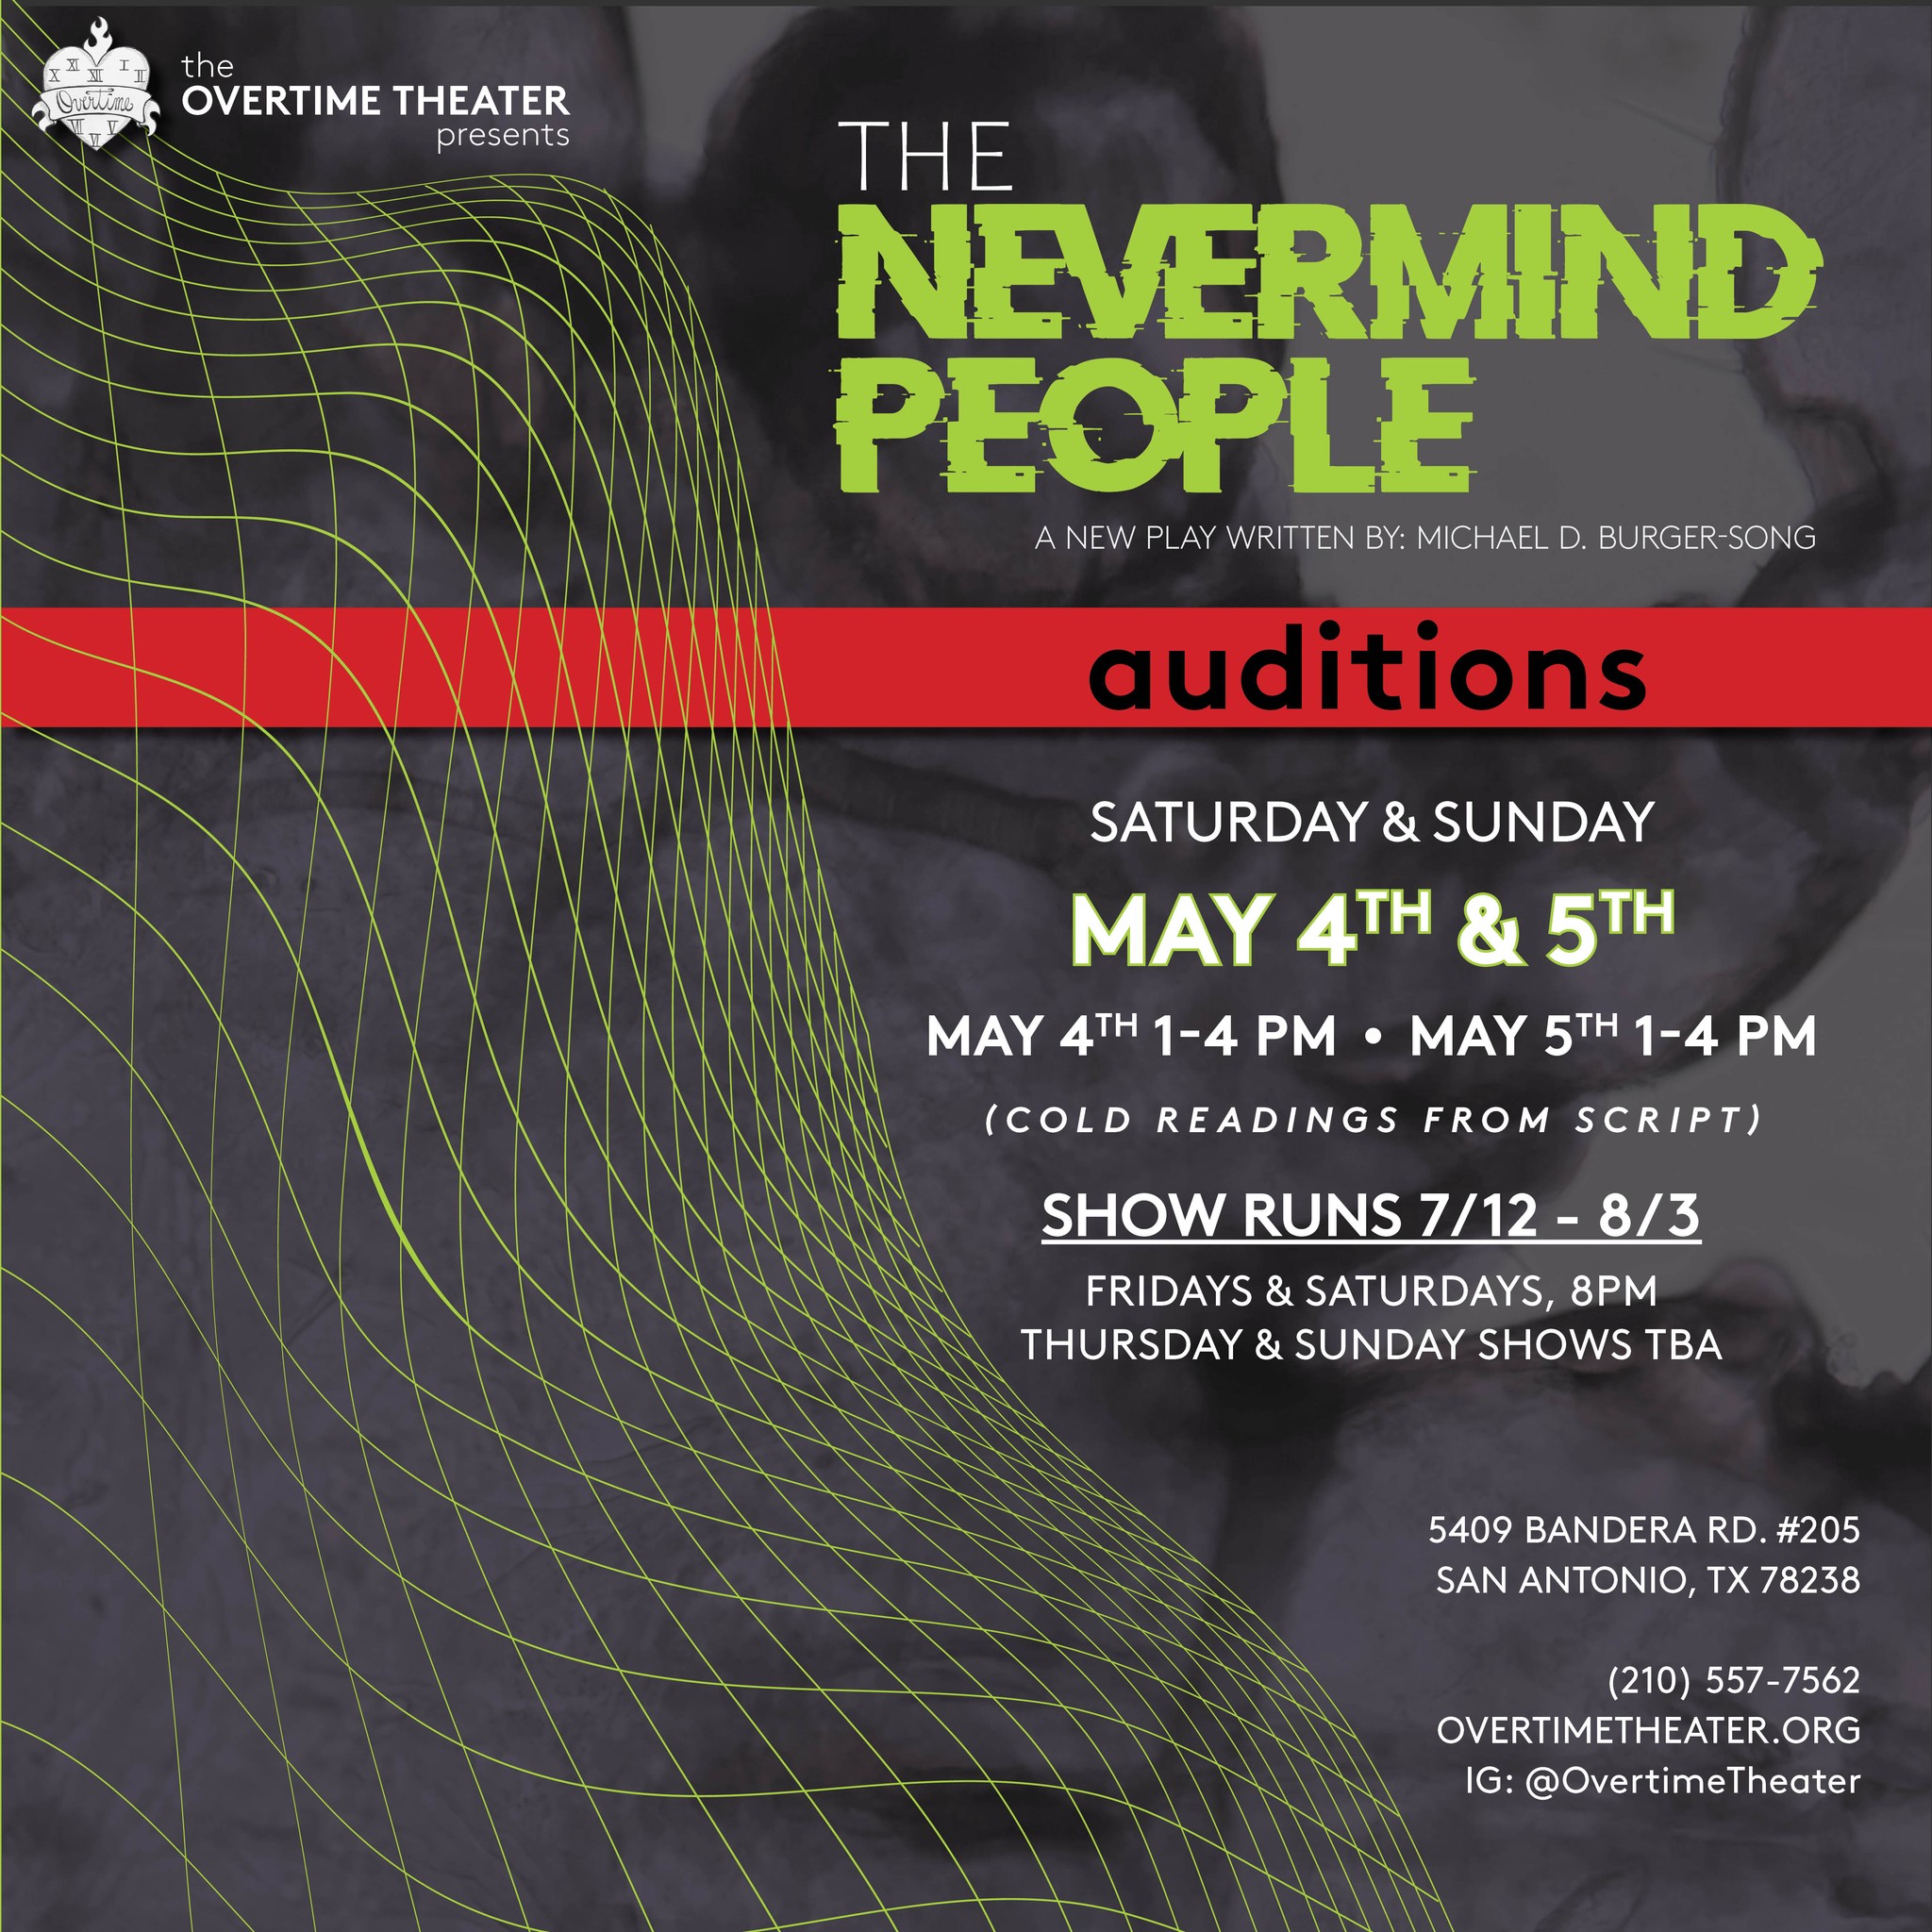 CTX3694. Auditions for The Nevermind People, by Overtime Theater, San Antonio